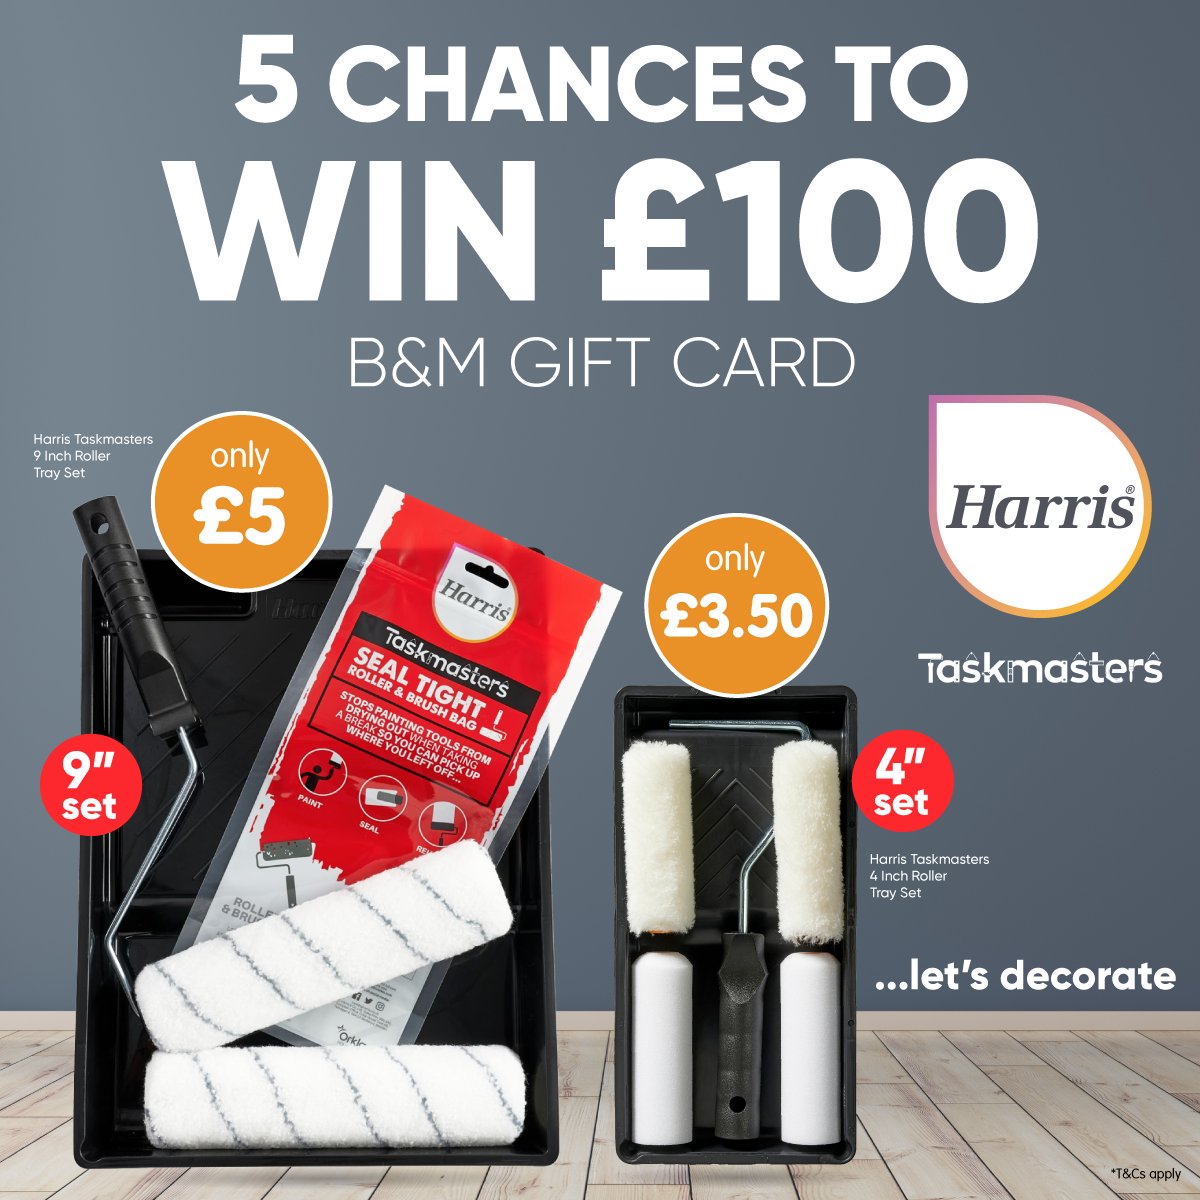 🖌️ #COMPETITION TIME 🖌️

We're teaming up with Harris to give away a massive £100 B&M gift card to FIVE lucky winner!

For a chance to #WIN, simply;

1) FOLLOW US
2) RT
3) COMMENT #BMHarris

Competition ends 9am 5/6/24